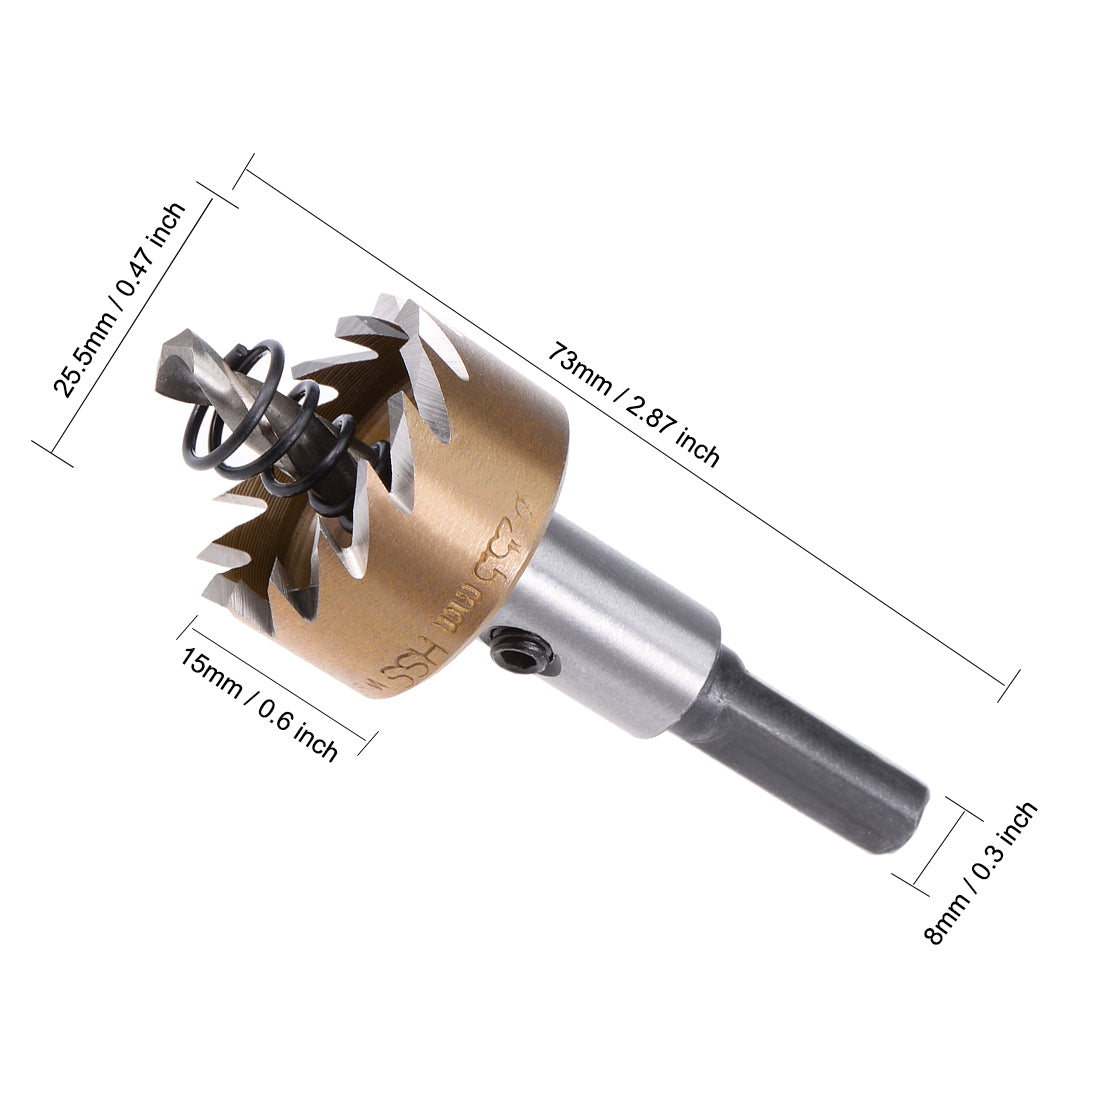 Uxcell Uxcell 28mm HSS Drill Bit Hole Saw Stainless High Speed Steel Metal Alloy